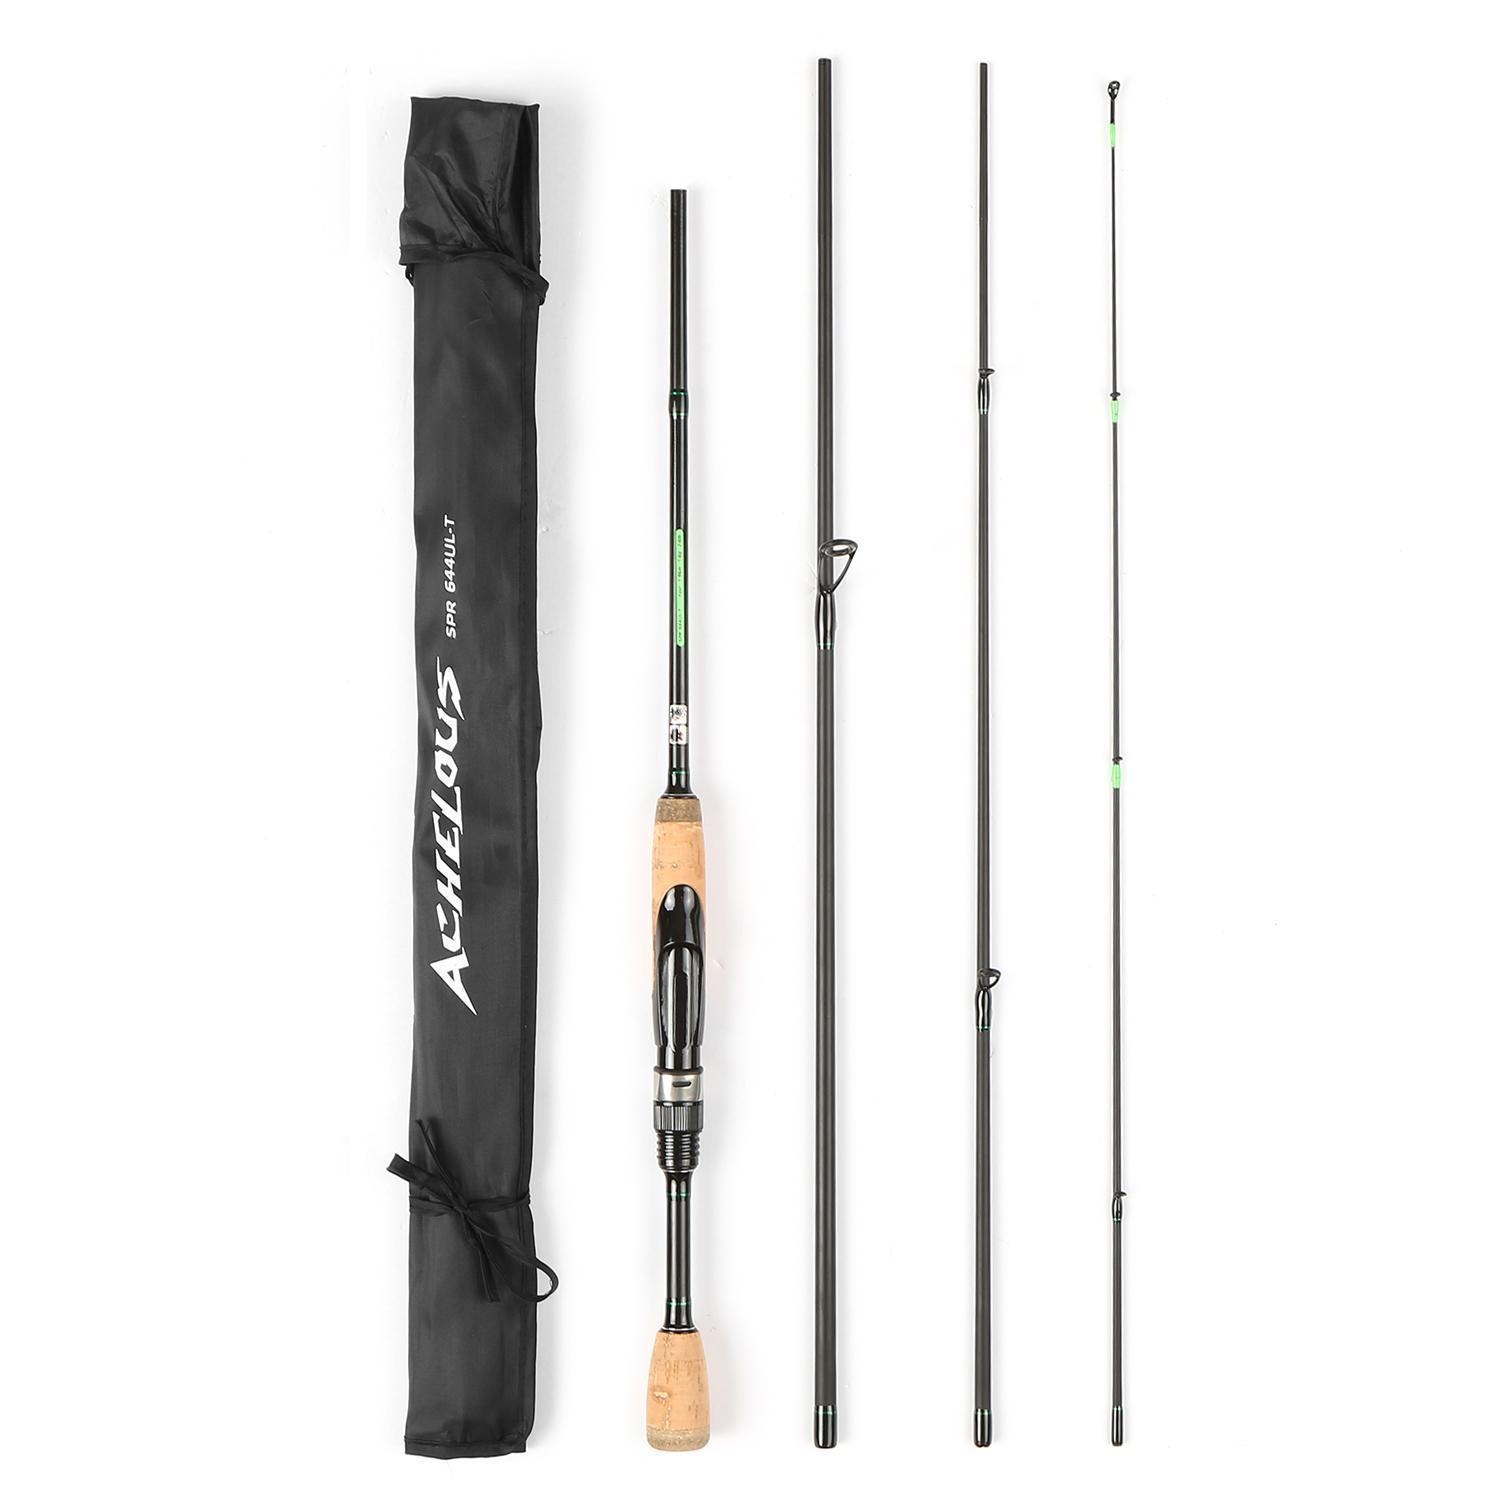 Portable Travel Spinning Fishing Rod Lightweight Carbon Fiber 4 Pieces Fishing Pole Promo